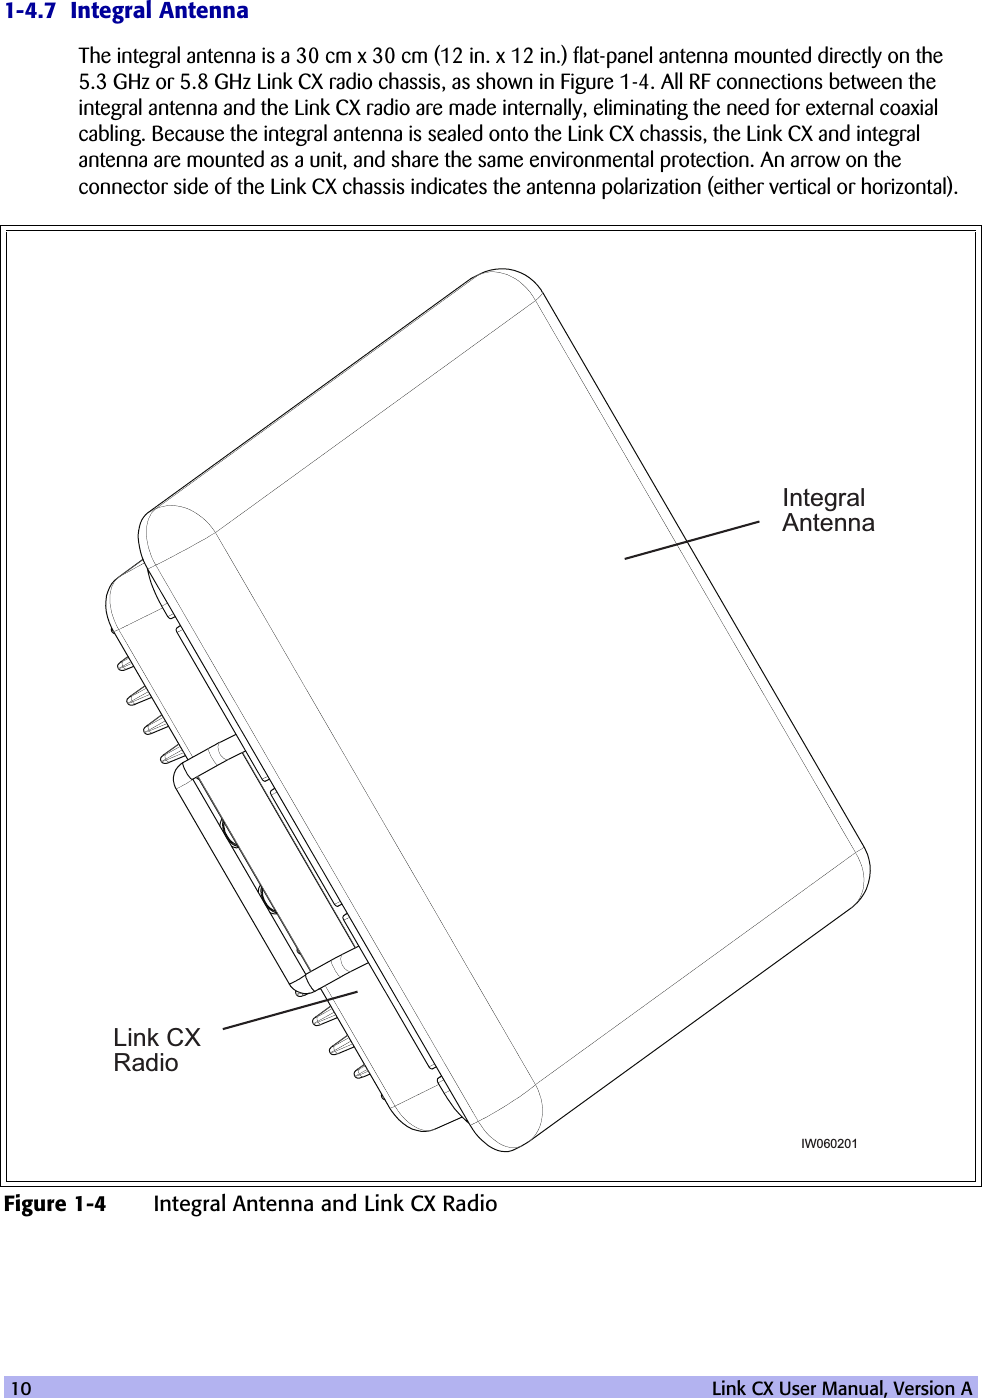 10   Link CX User Manual, Version A1-4.7  Integral AntennaThe integral antenna is a 30 cm x 30 cm (12 in. x 12 in.) flat-panel antenna mounted directly on the 5.3 GHz or 5.8 GHz Link CX radio chassis, as shown in Figure 1-4. All RF connections between the integral antenna and the Link CX radio are made internally, eliminating the need for external coaxial cabling. Because the integral antenna is sealed onto the Link CX chassis, the Link CX and integral antenna are mounted as a unit, and share the same environmental protection. An arrow on the connector side of the Link CX chassis indicates the antenna polarization (either vertical or horizontal).Figure 1-4 Integral Antenna and Link CX RadioIntegralAntennaLink CXRadioIW060201